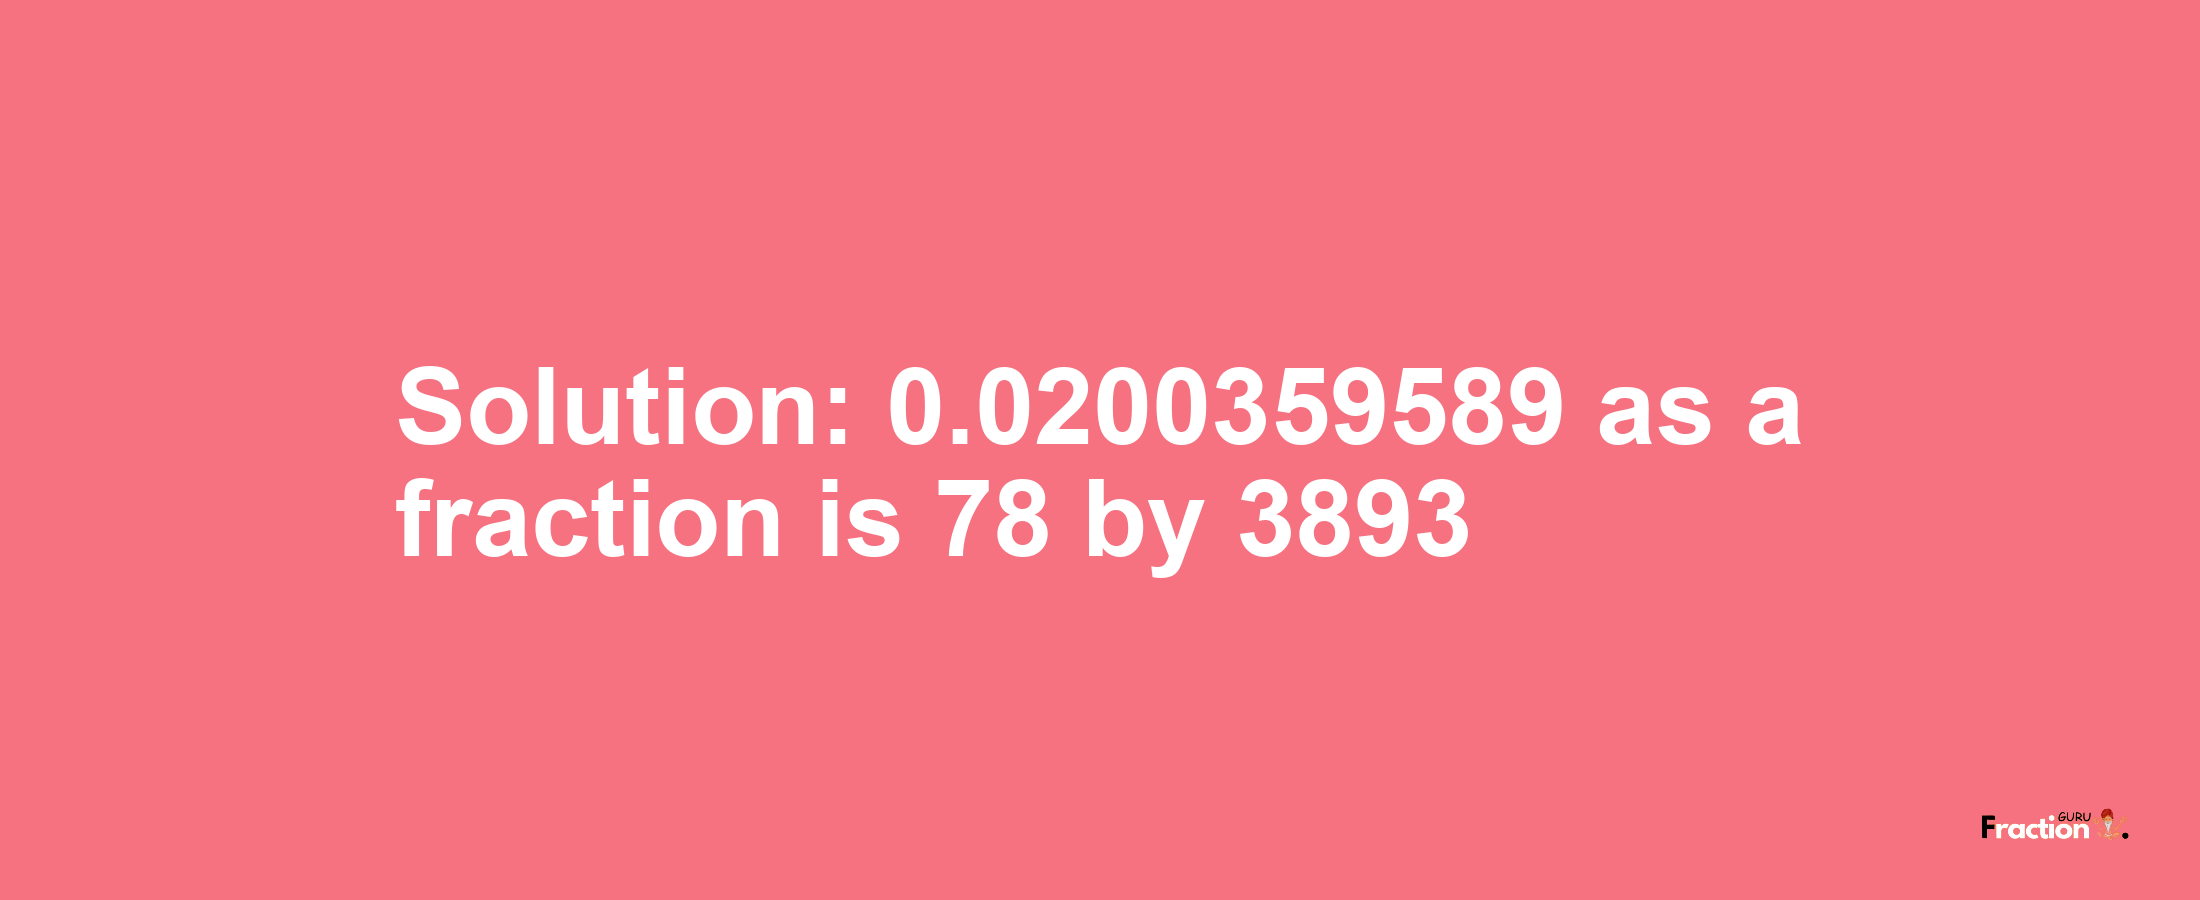 Solution:0.0200359589 as a fraction is 78/3893